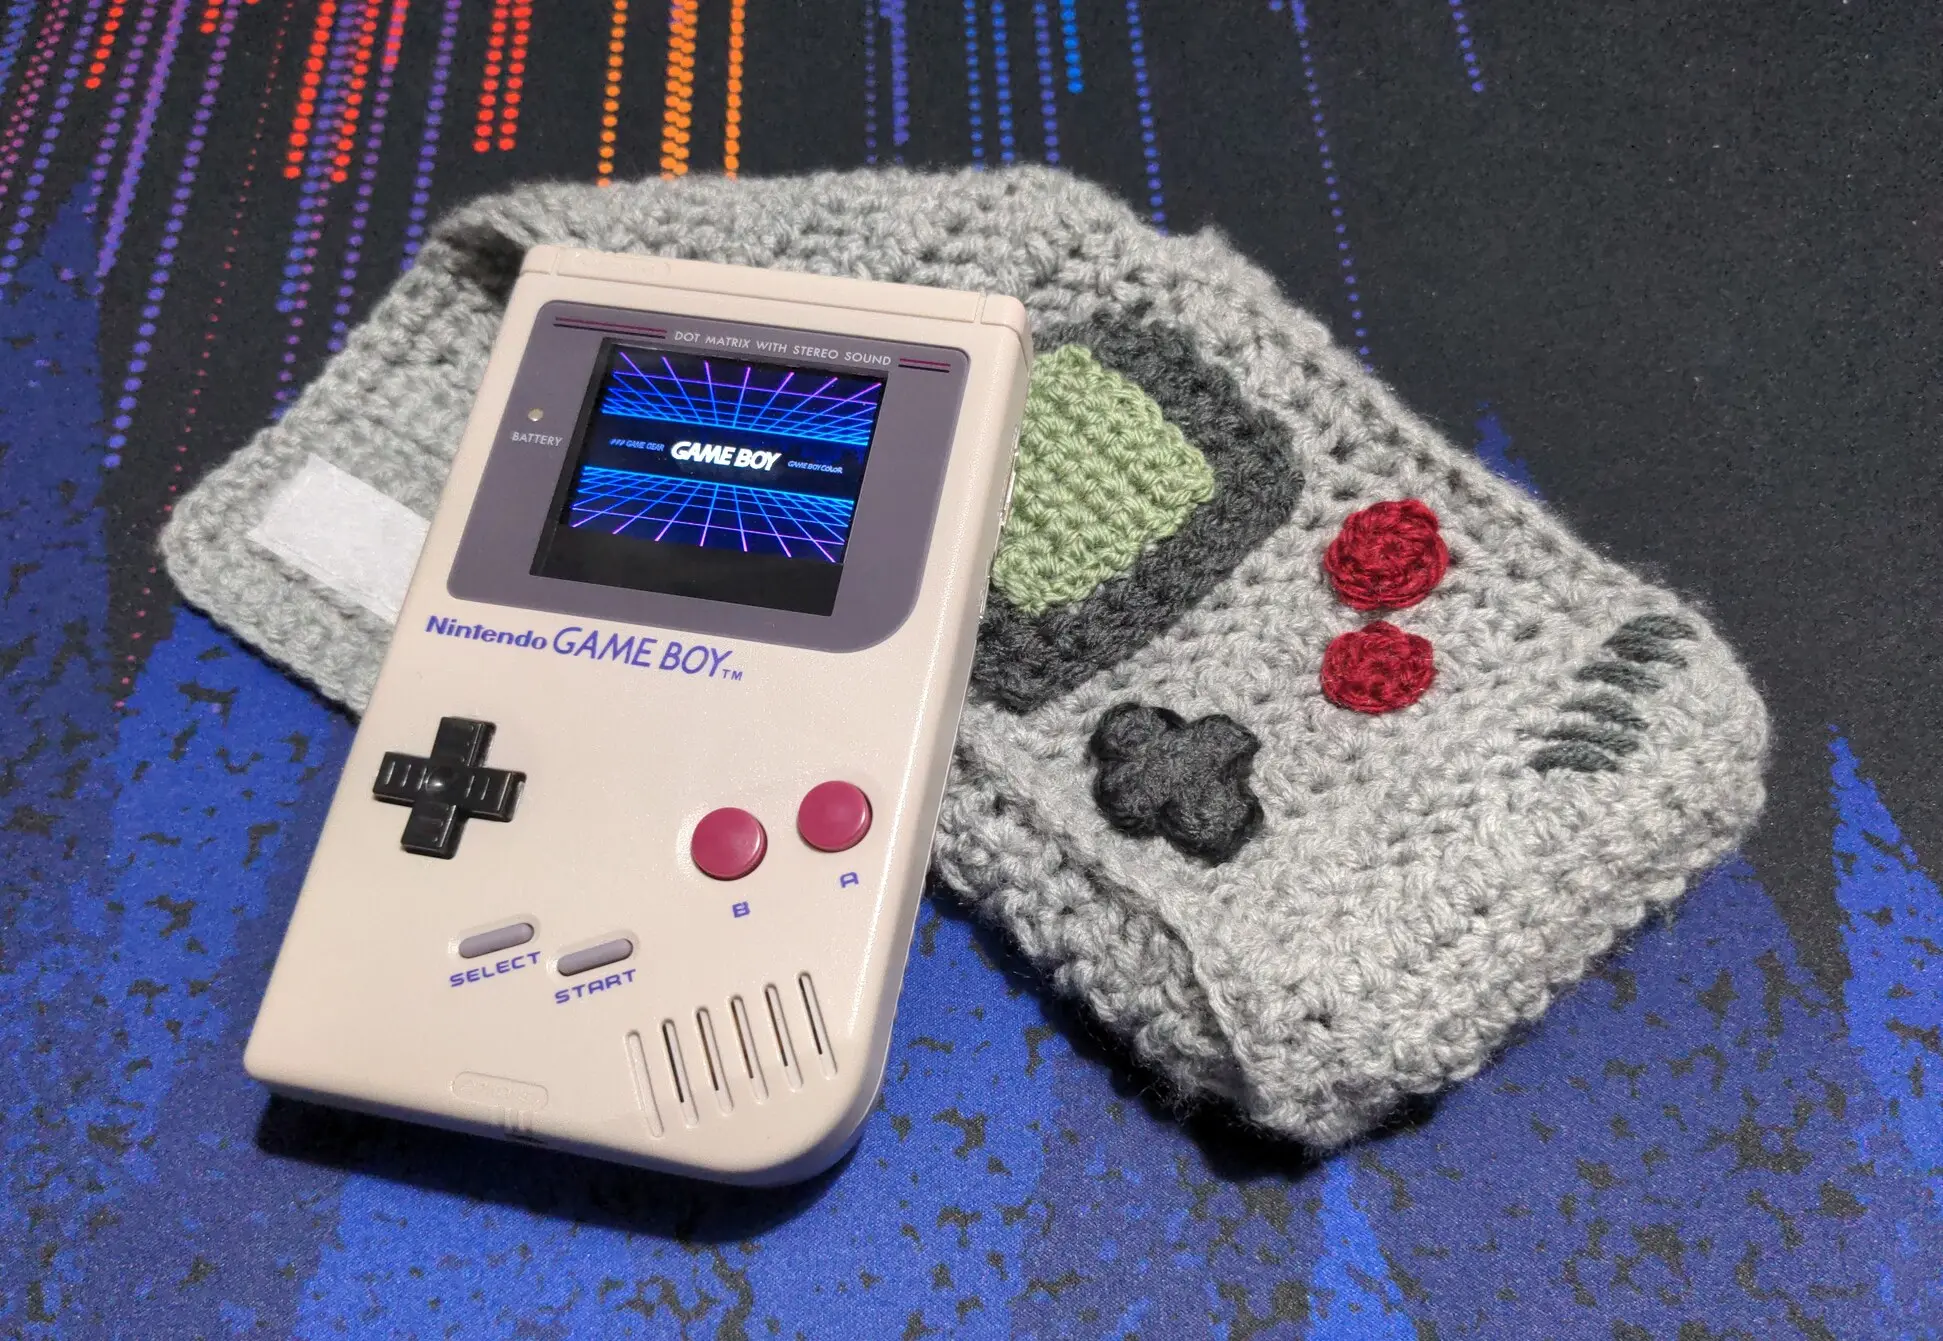 Image of a Raspberry Pi modified DMG-01 Gameboy resting on a crocheted pouch